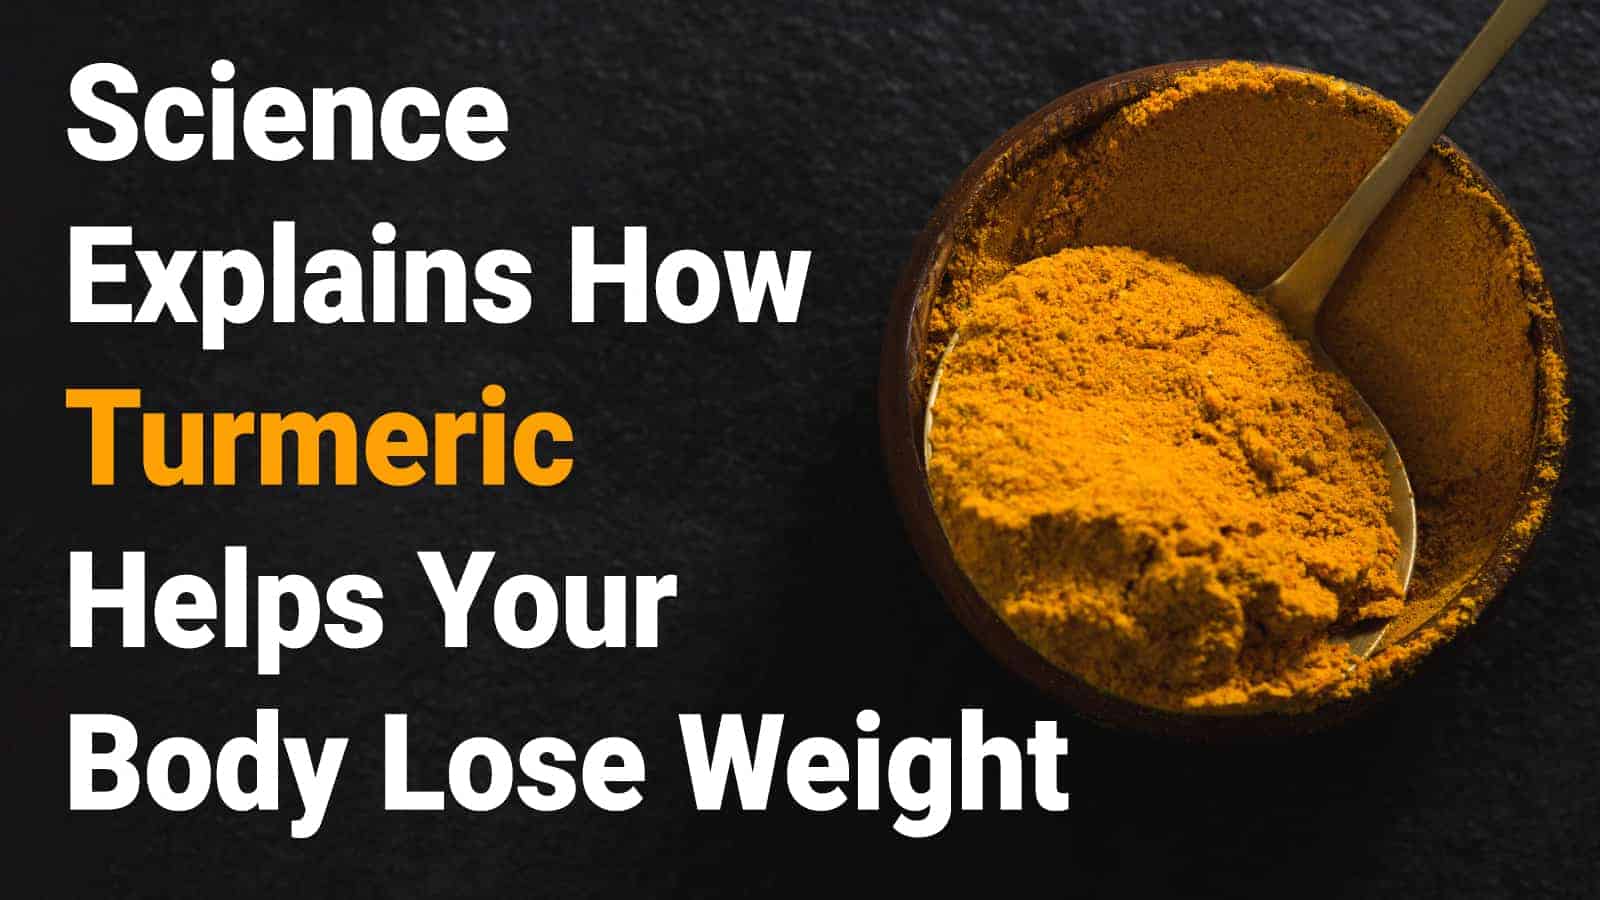 Science Explains How Turmeric Helps Your Body Lose Weight